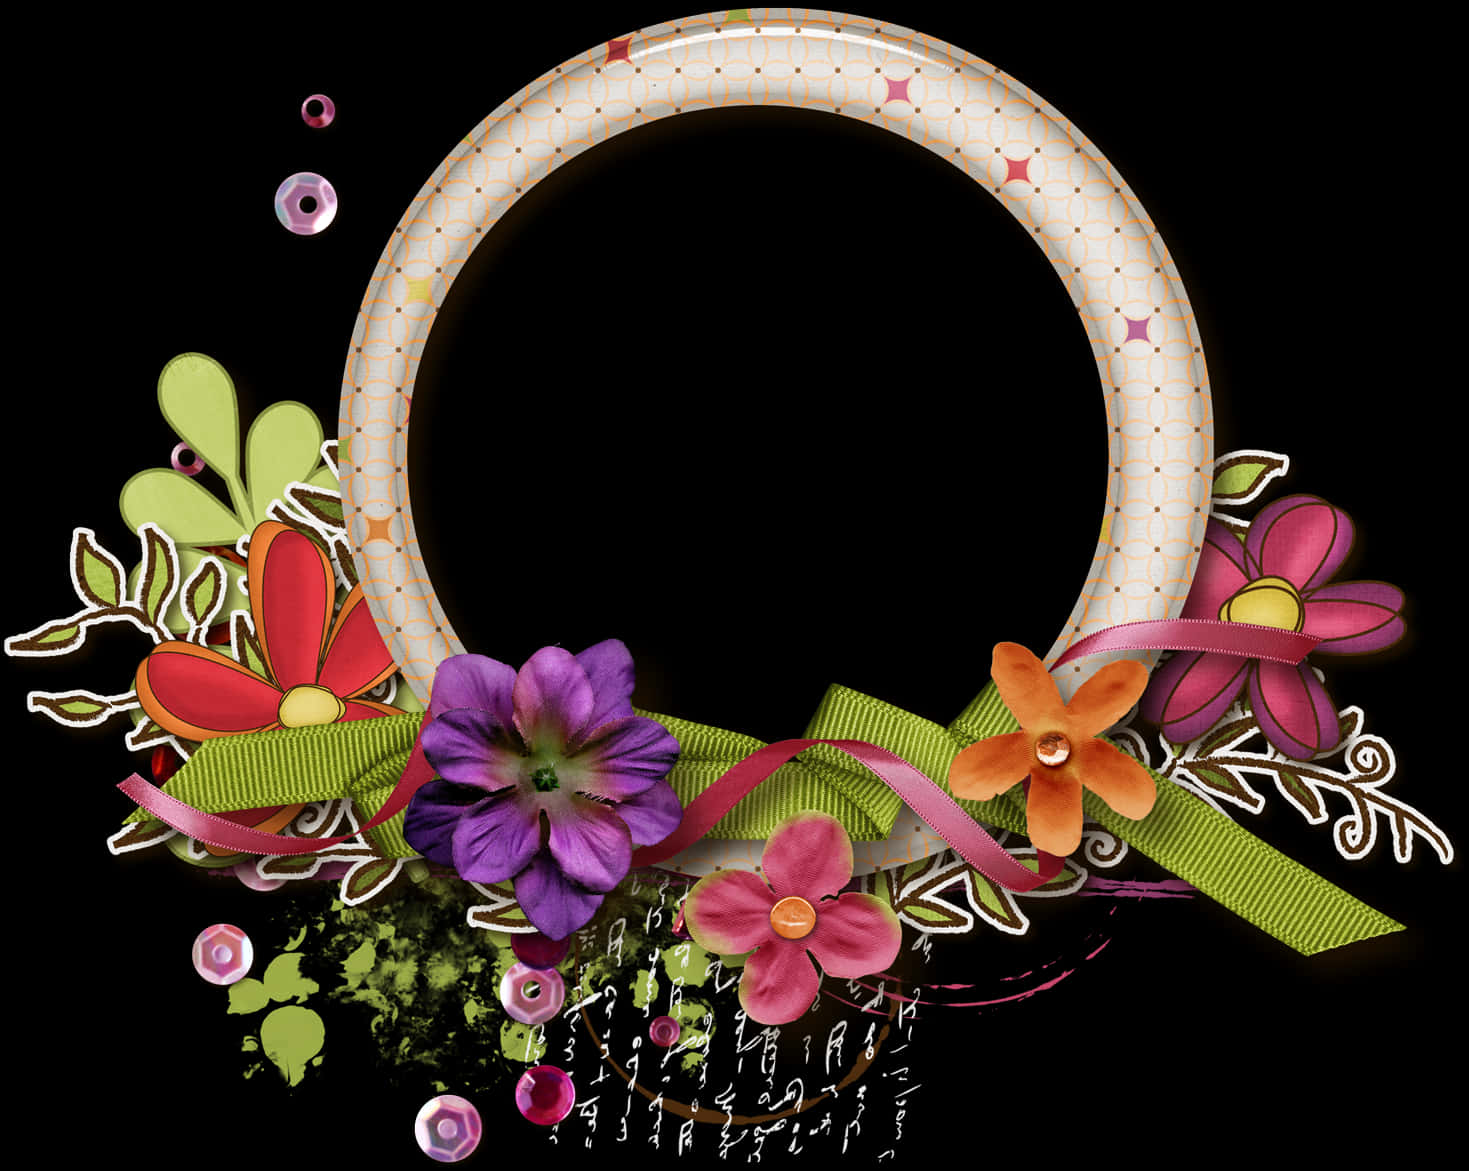 A Round Frame With Flowers And Ribbons